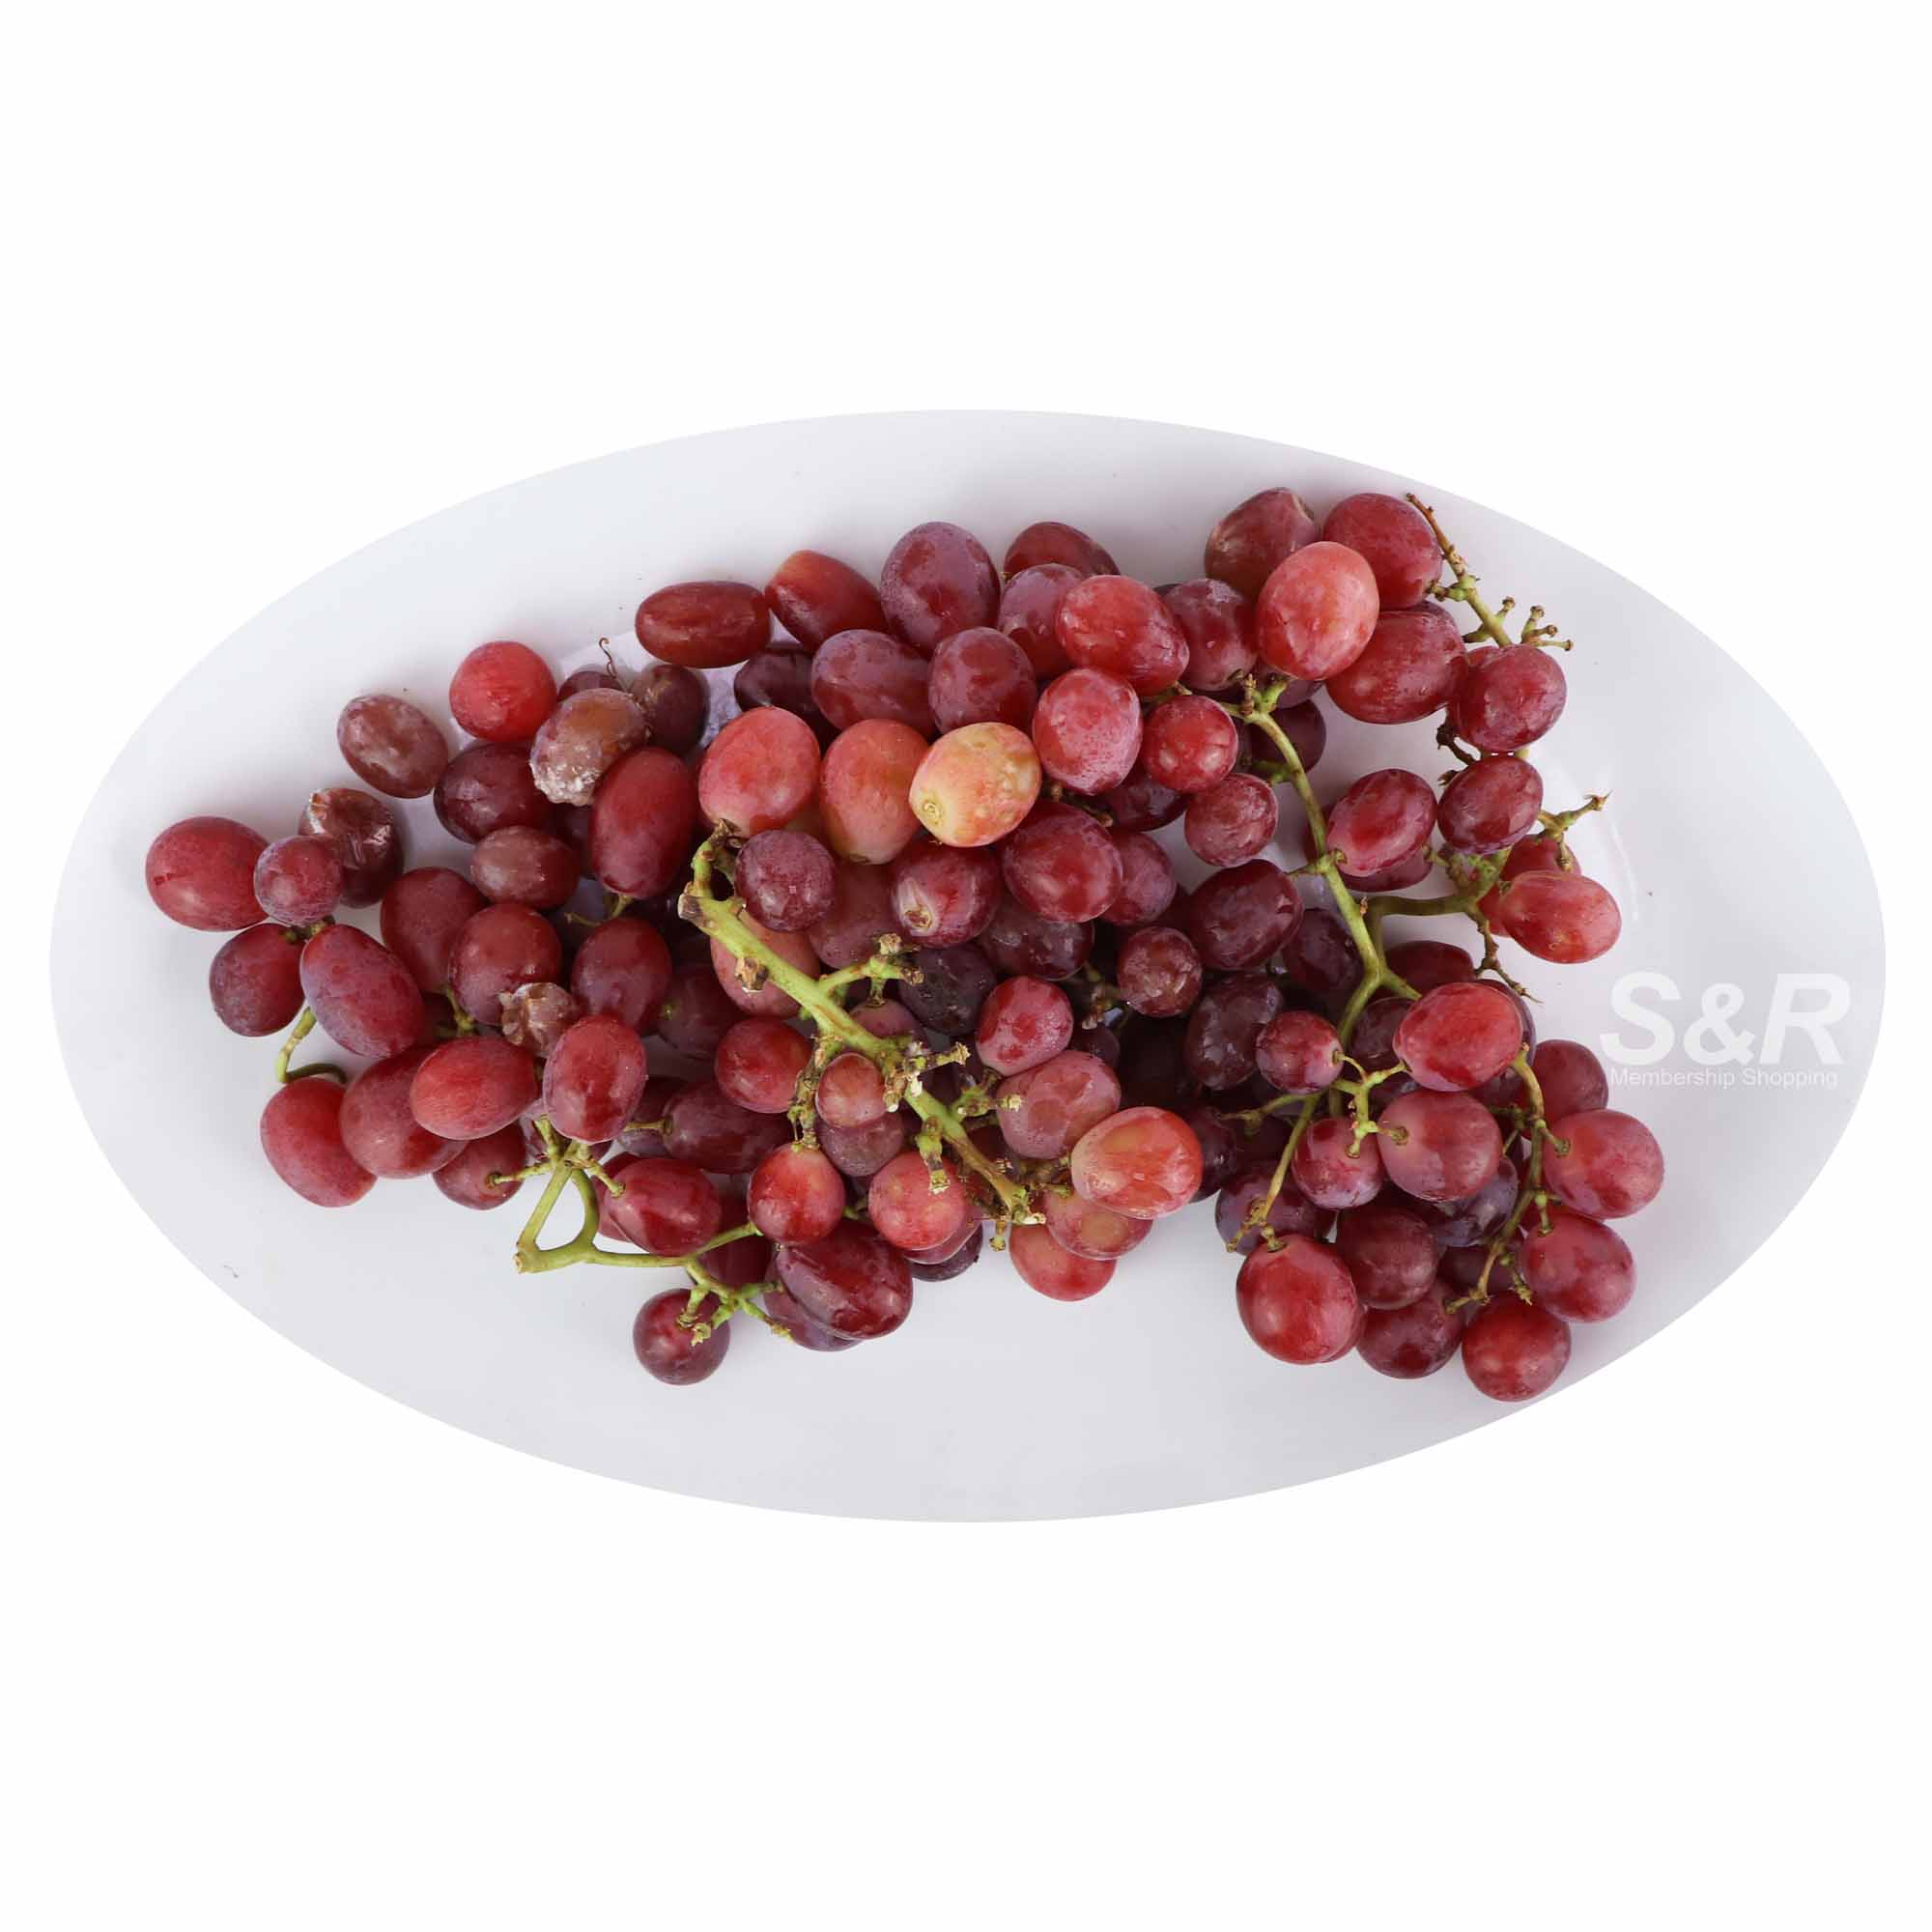 S&R Australian Seedless Red Grapes approx. 1.3kg